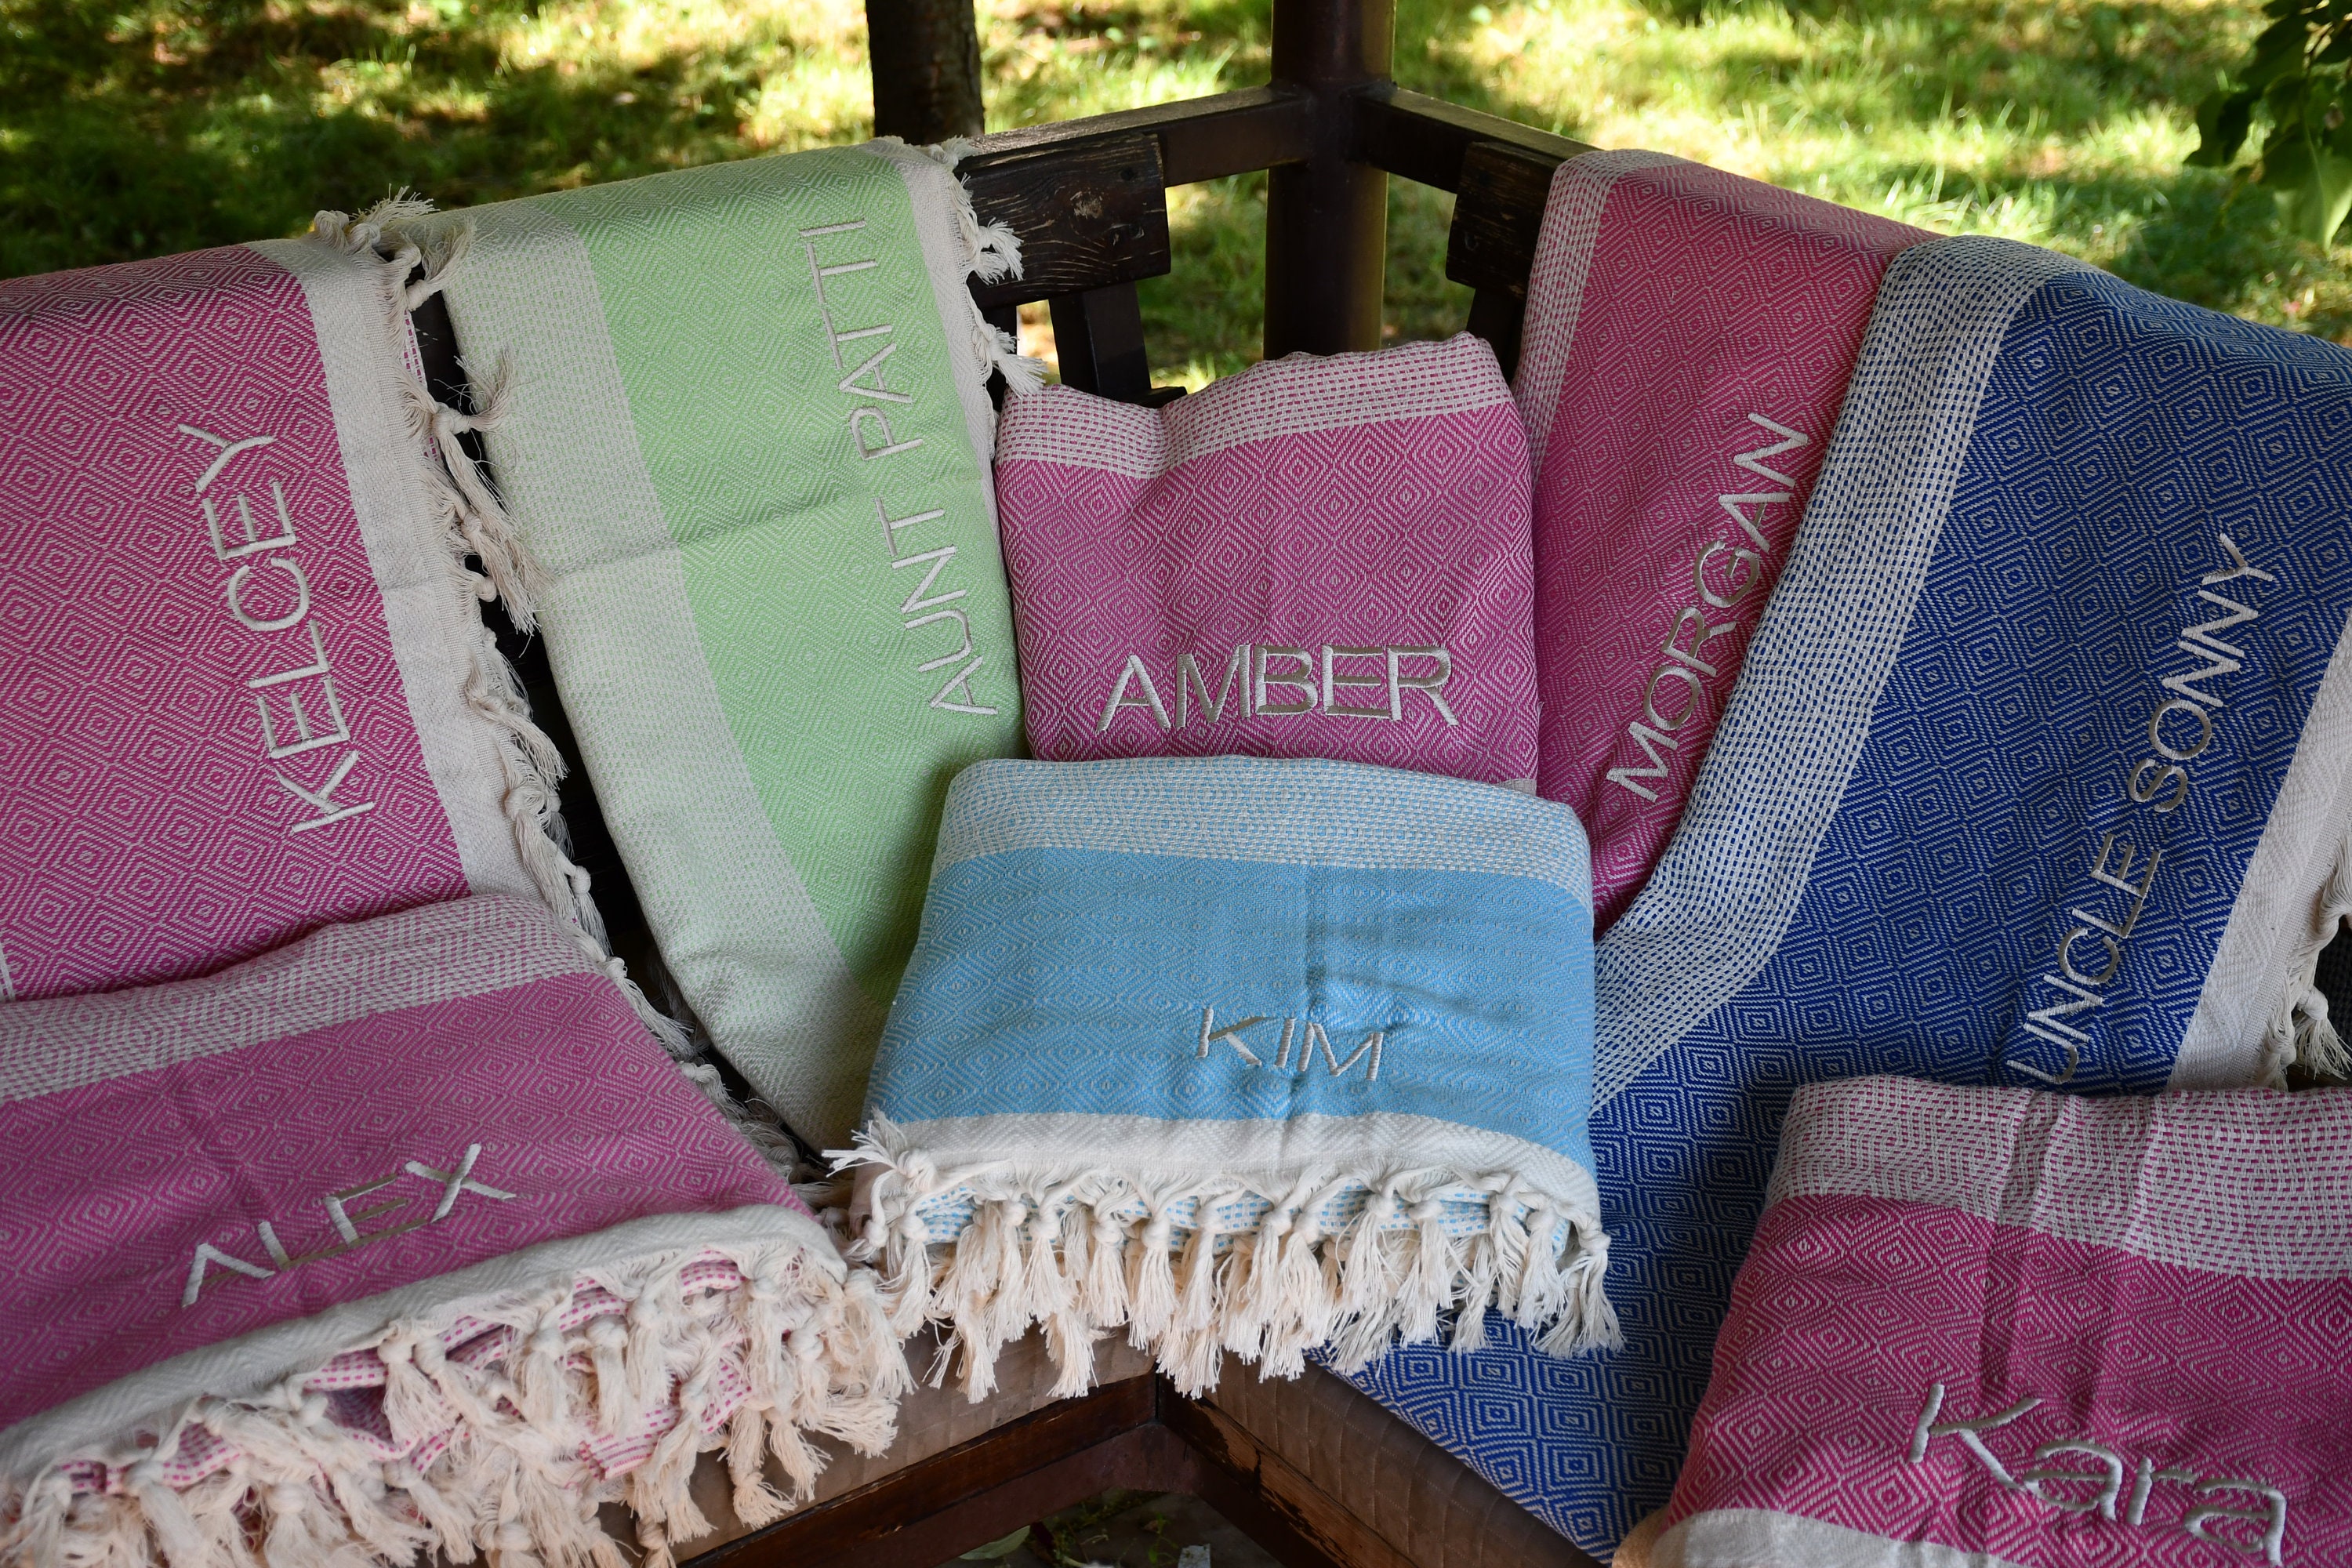 Turkish Throw Blanket, Customize Towel Set of 4, Lightweight Throw Blanket,  Linen Beach Towel, Picnic Table Throw, Mother's Day Gift 